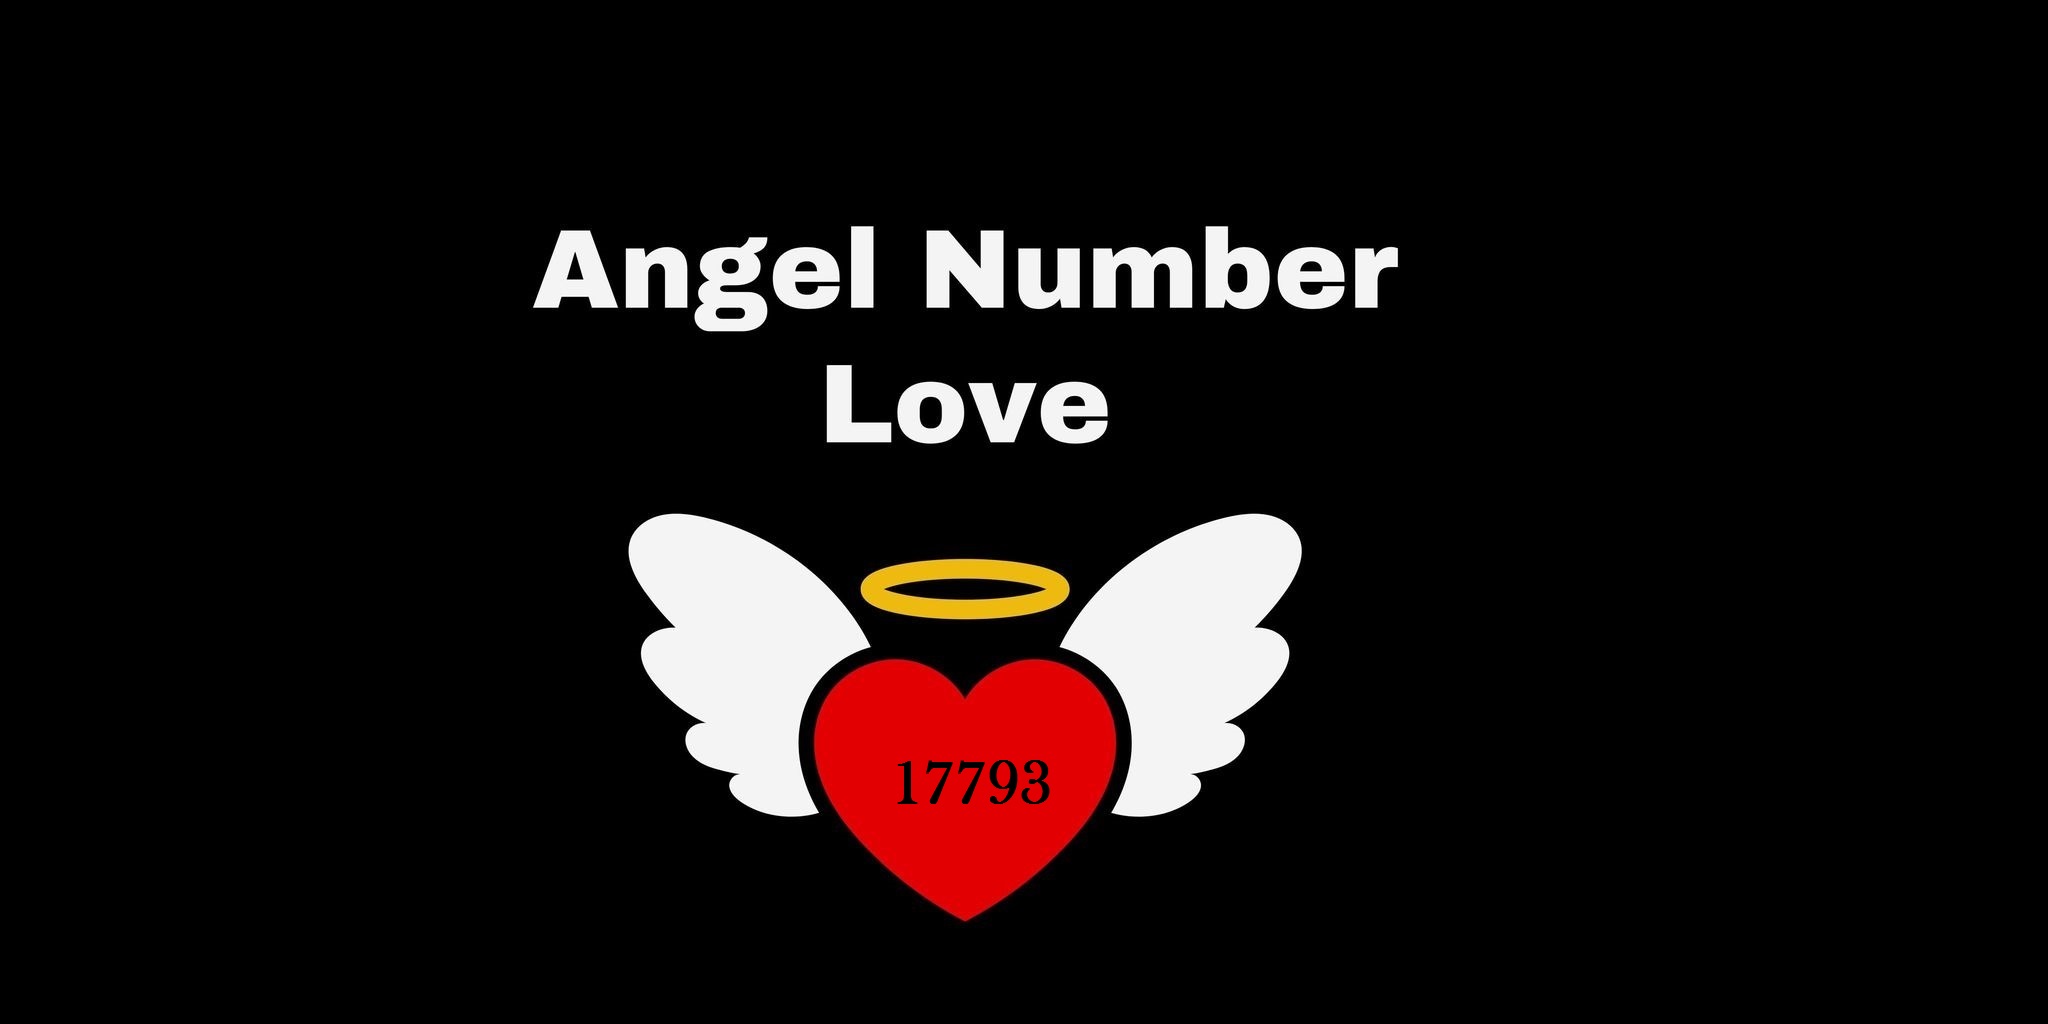 17793 Angel Number Meaning In Love